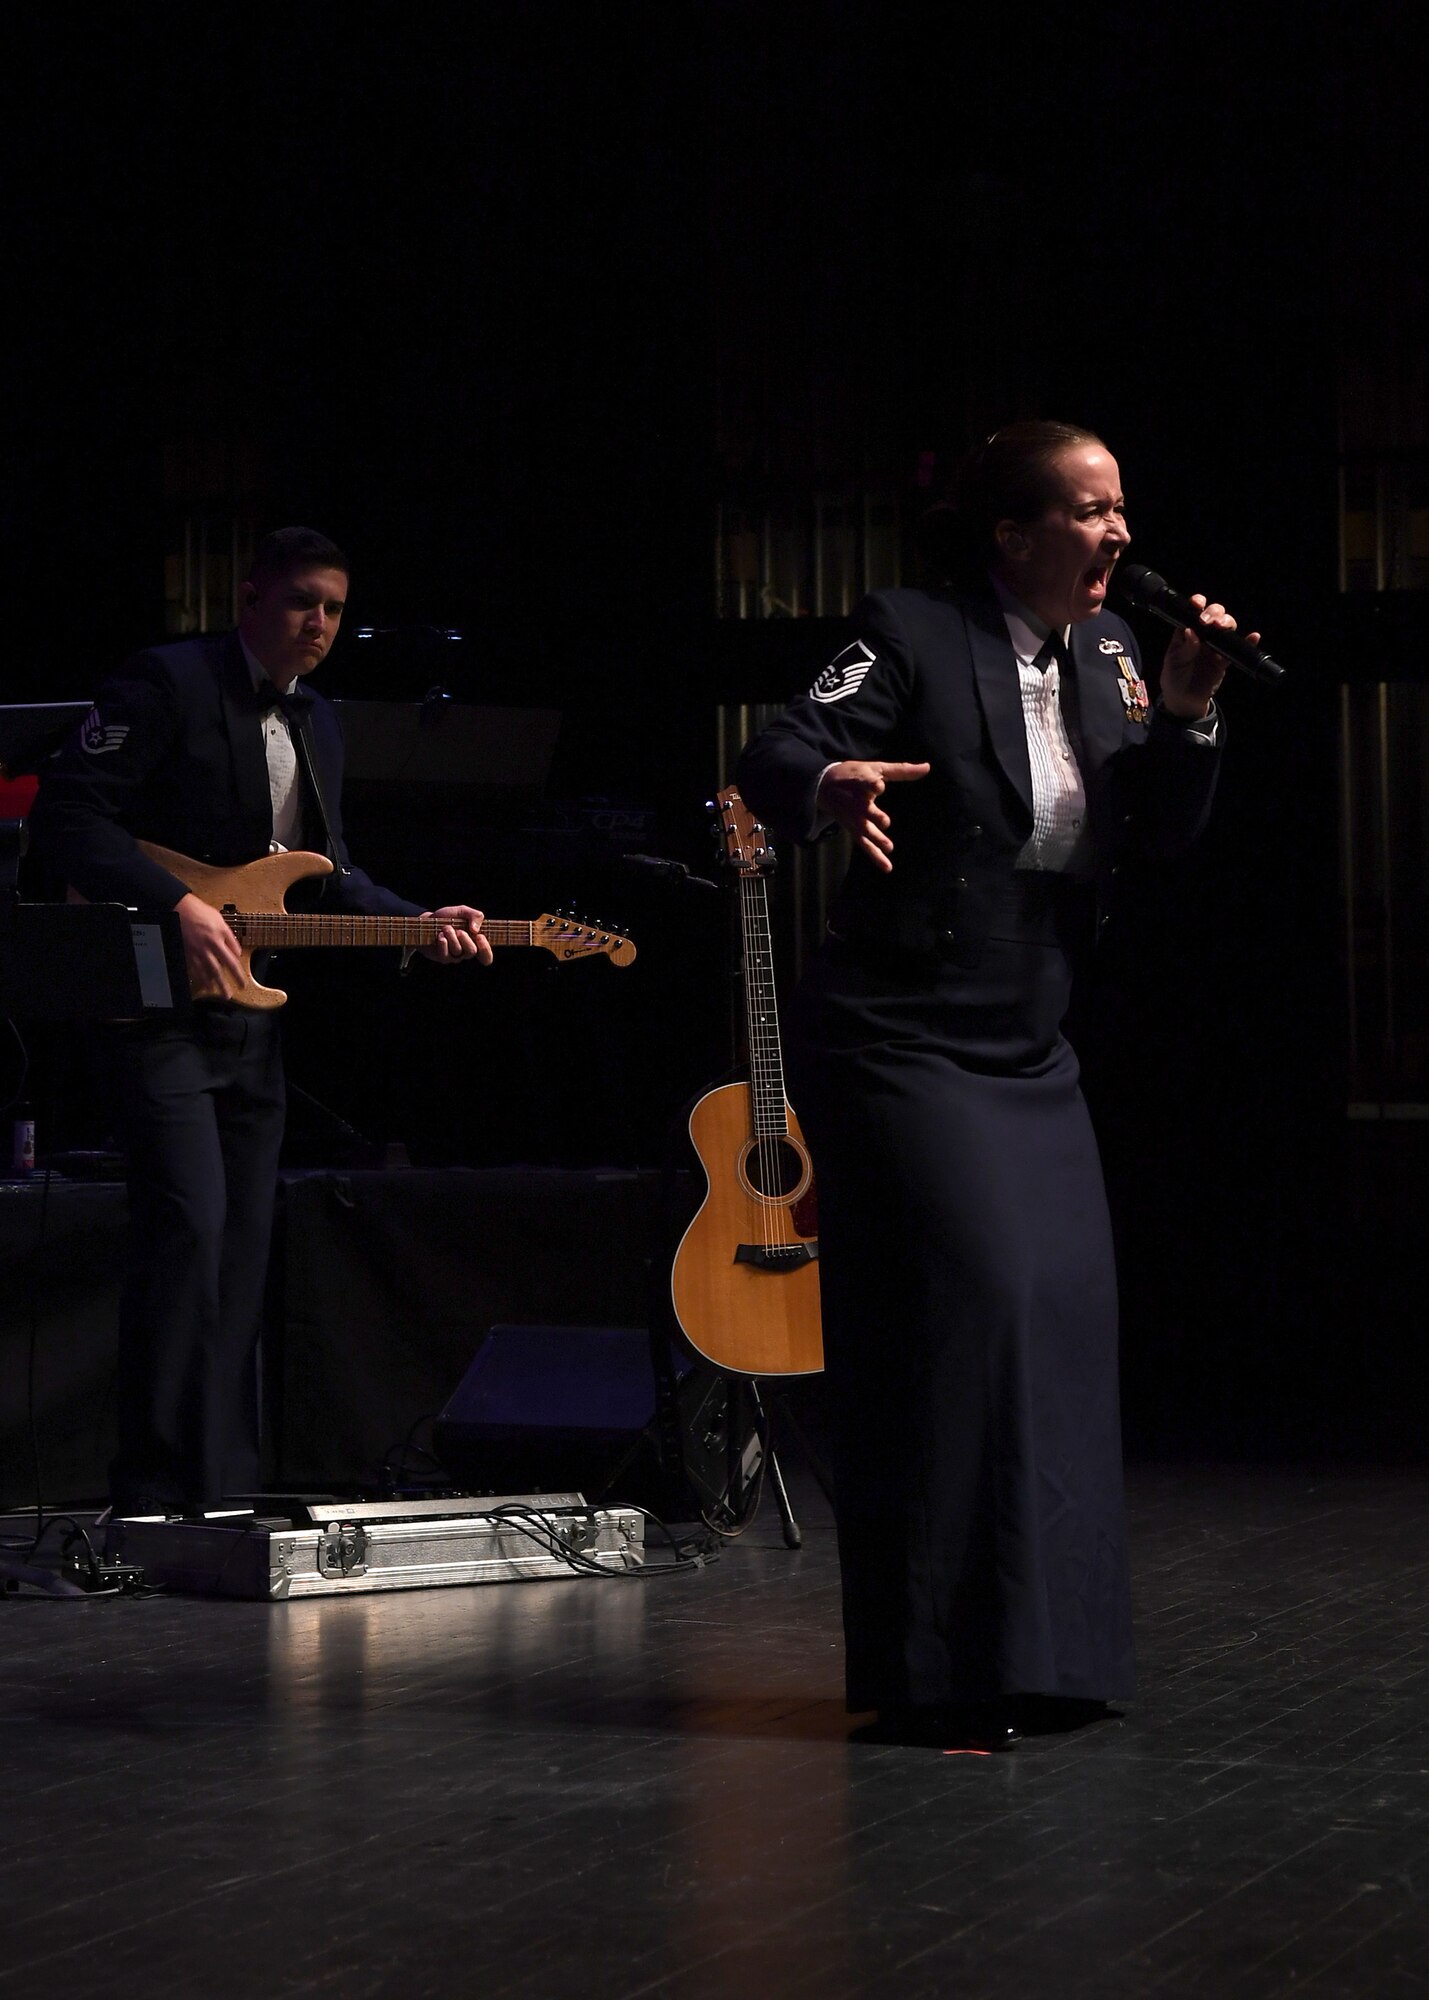 Master Sgt. Rebecca Wischmann, U.S. Air Force Heartland of America Band vocalist, sings for a crowd of military and community members who attended a special Veterans Day concert November 6, 2018, at the Chester Fritz Auditorium in Grand Forks, North Dakota. The Heartland of America Band, which began as the 402nd Army Air Force Band on February 1, 1943 at Ardmore Army Base, Oklahoma, performed a two-hour program to honor all veterans and service members. (U.S. Air Force photo by Airman 1st Class Elora J. Martinez)